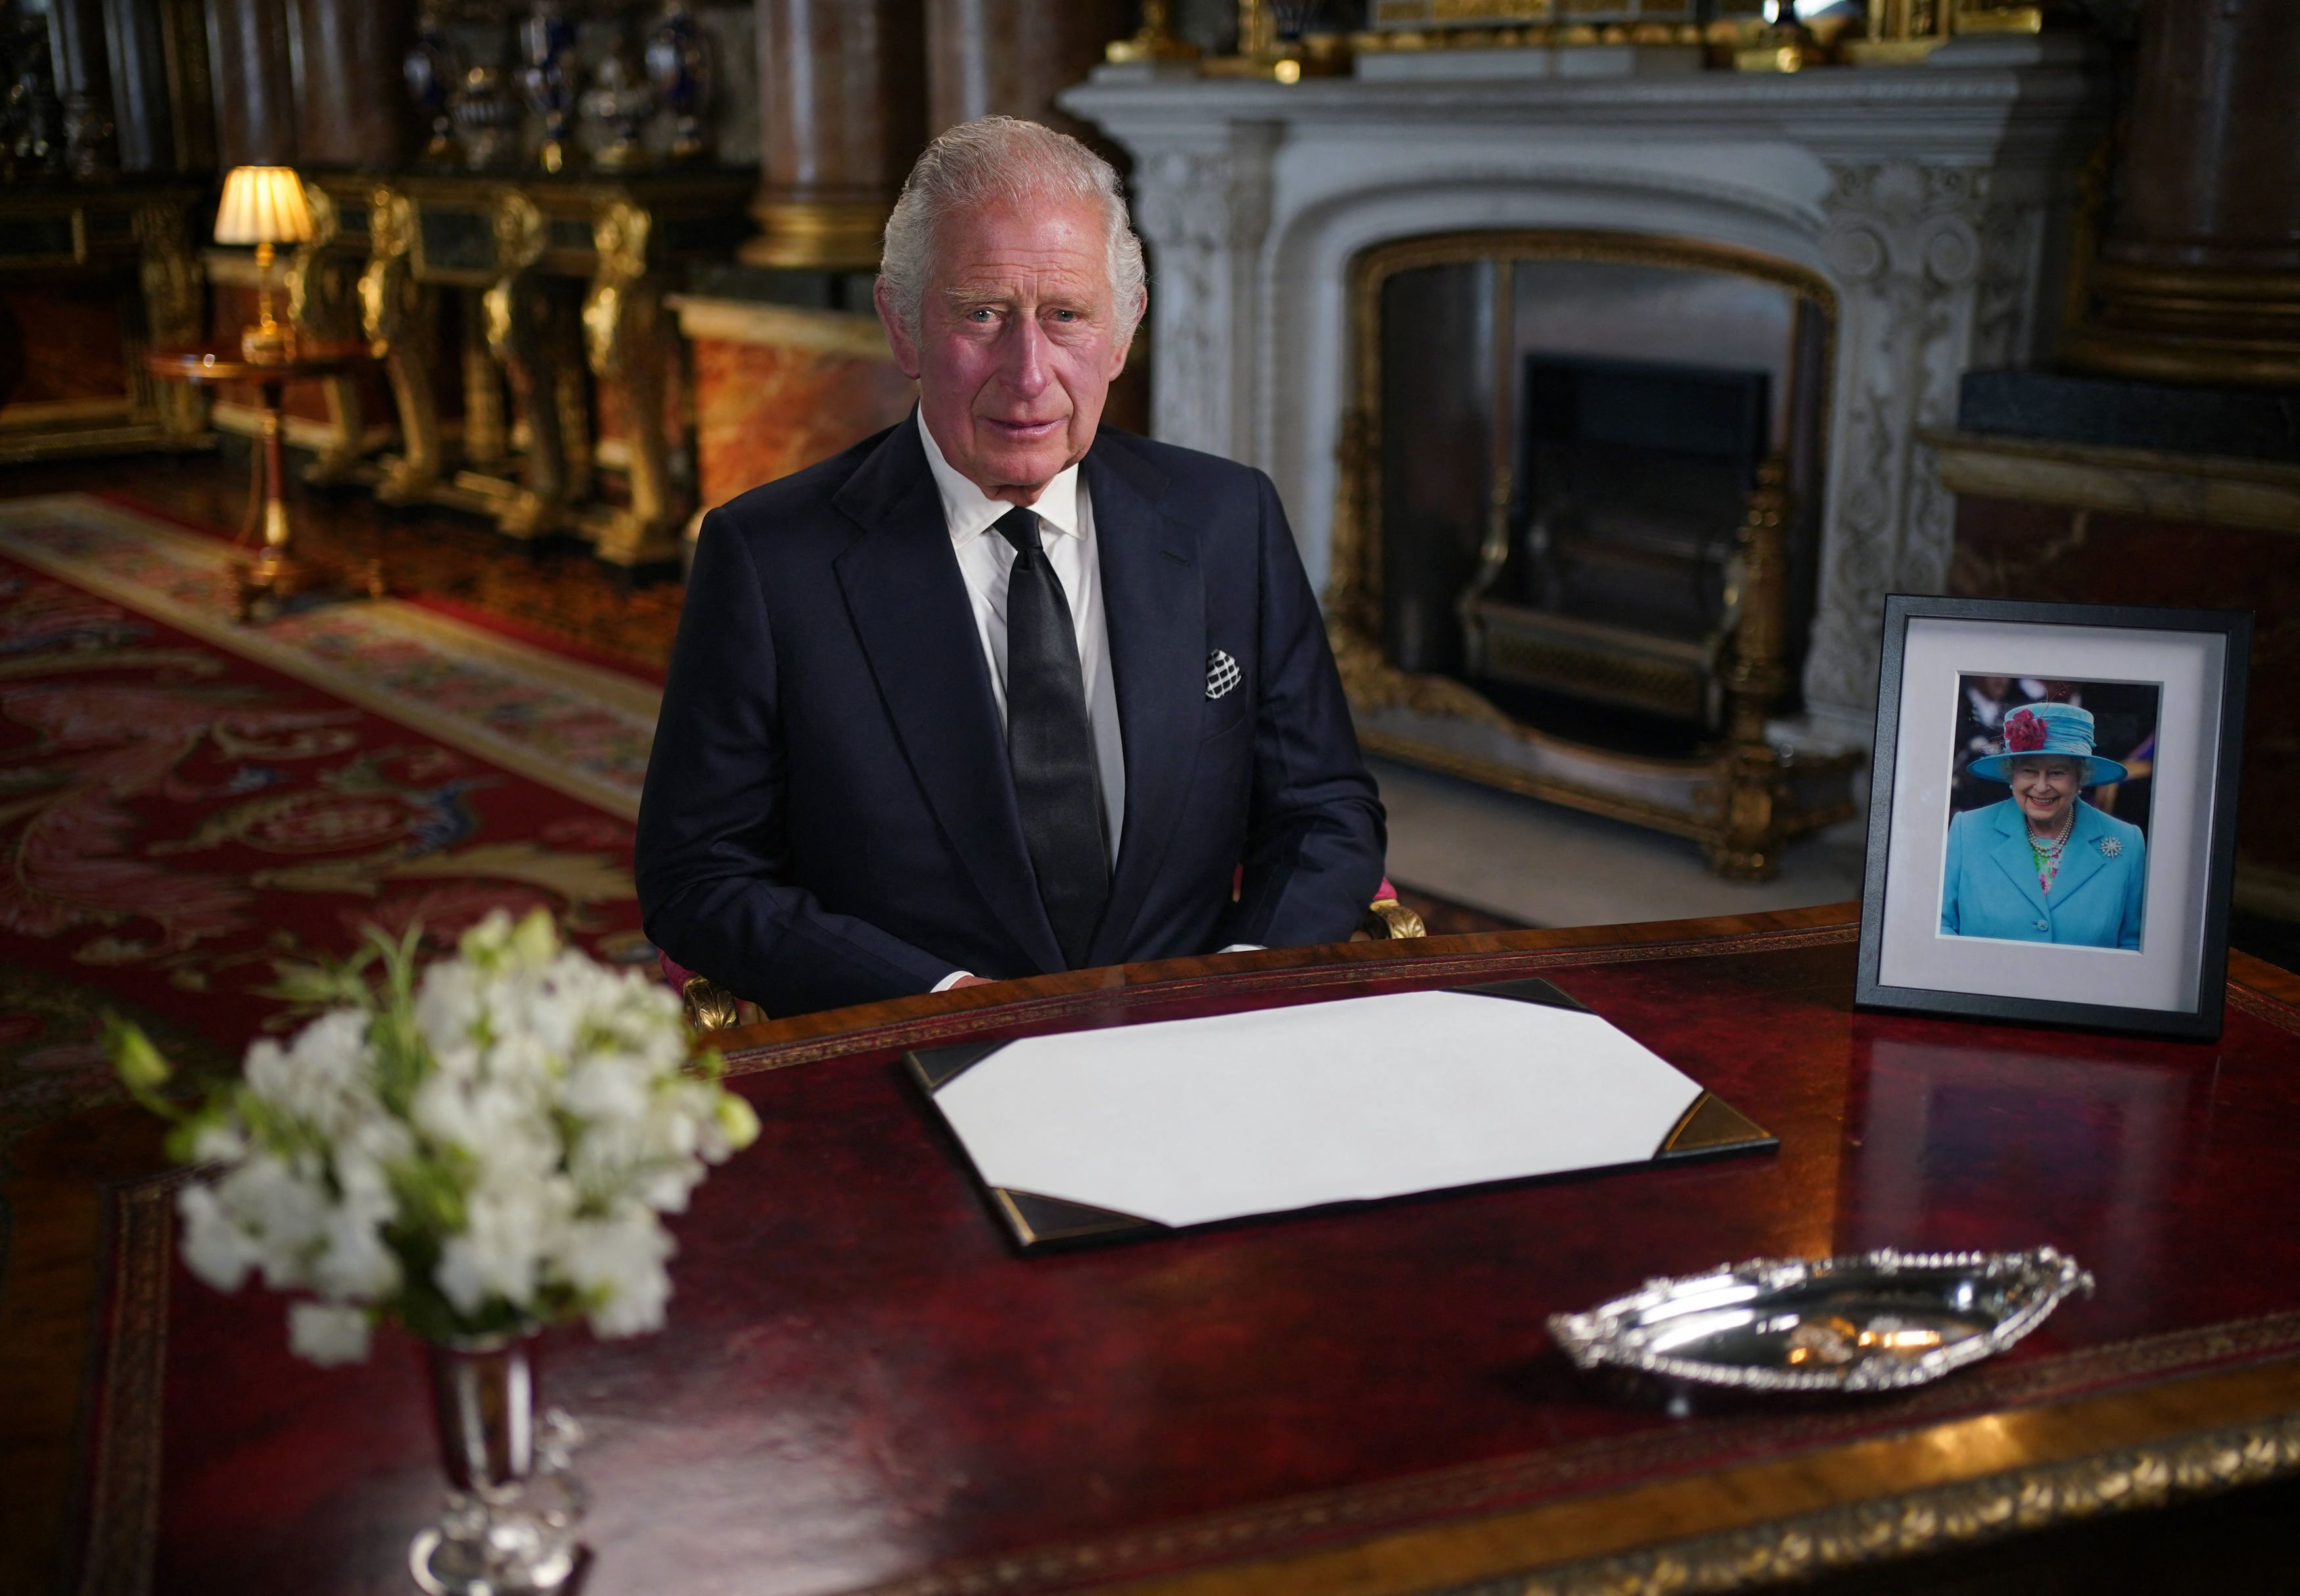 Here are some interesting facts about King Charles III, the new British monarch